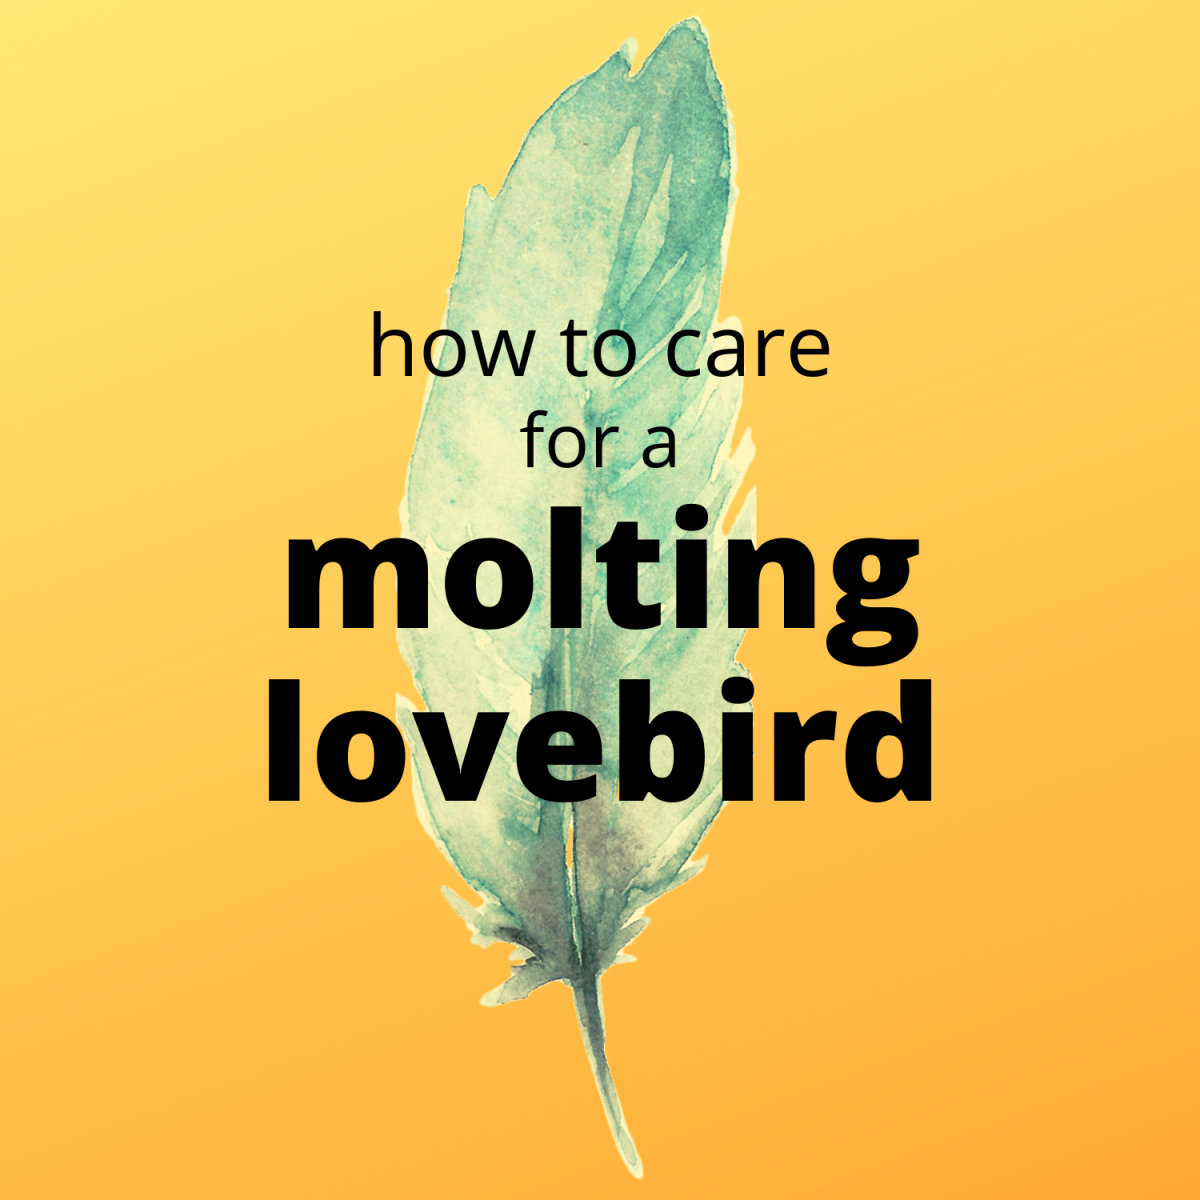 lovebird-molting-symptoms-and-care